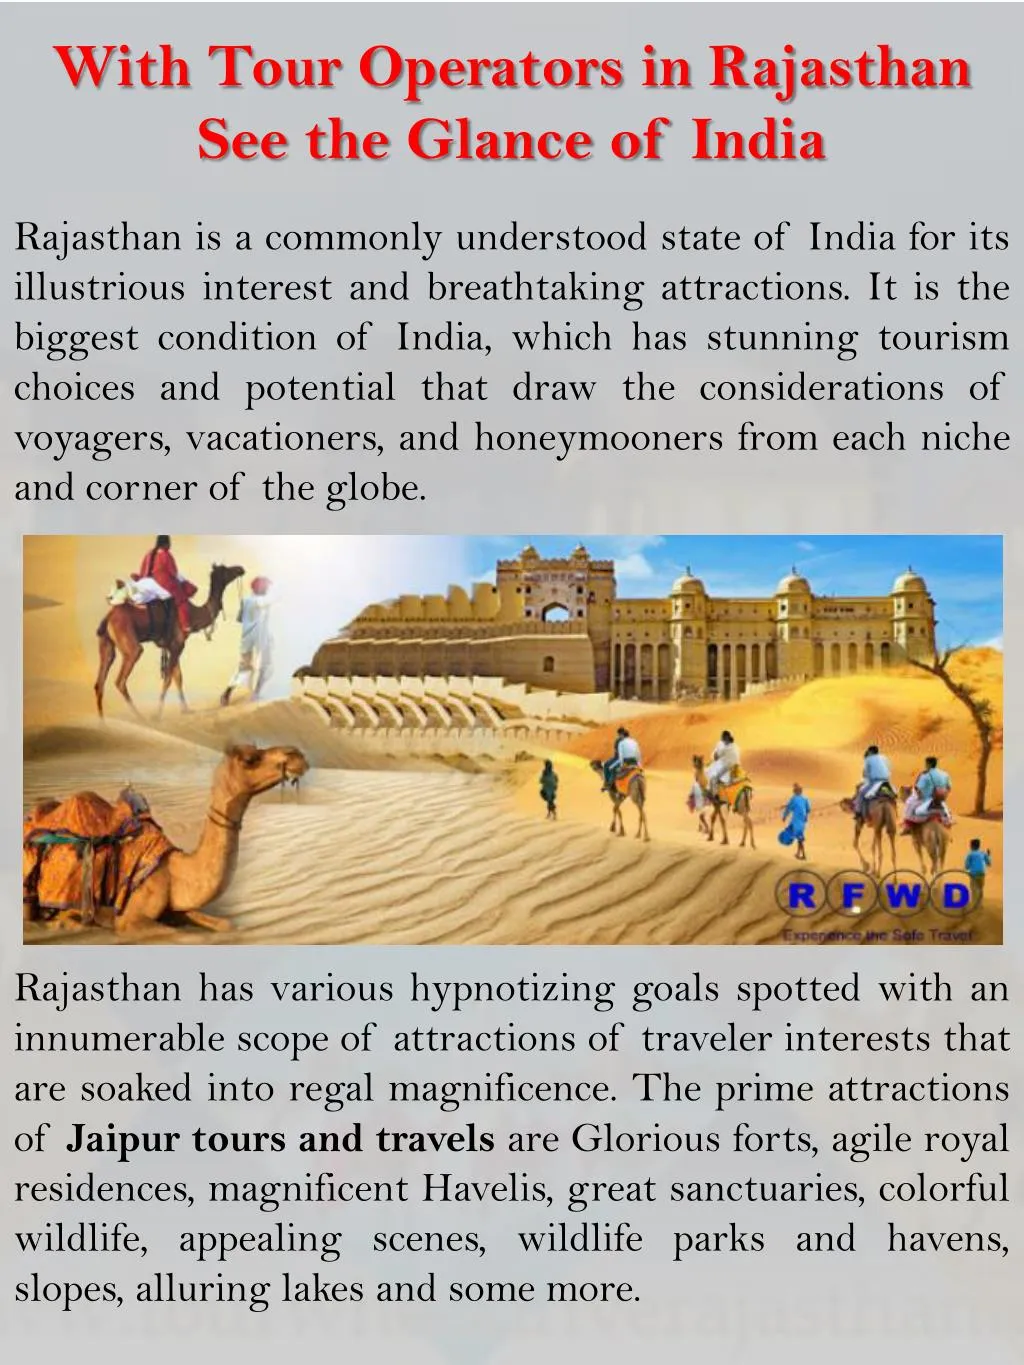 with tour operators in rajasthan see the glance